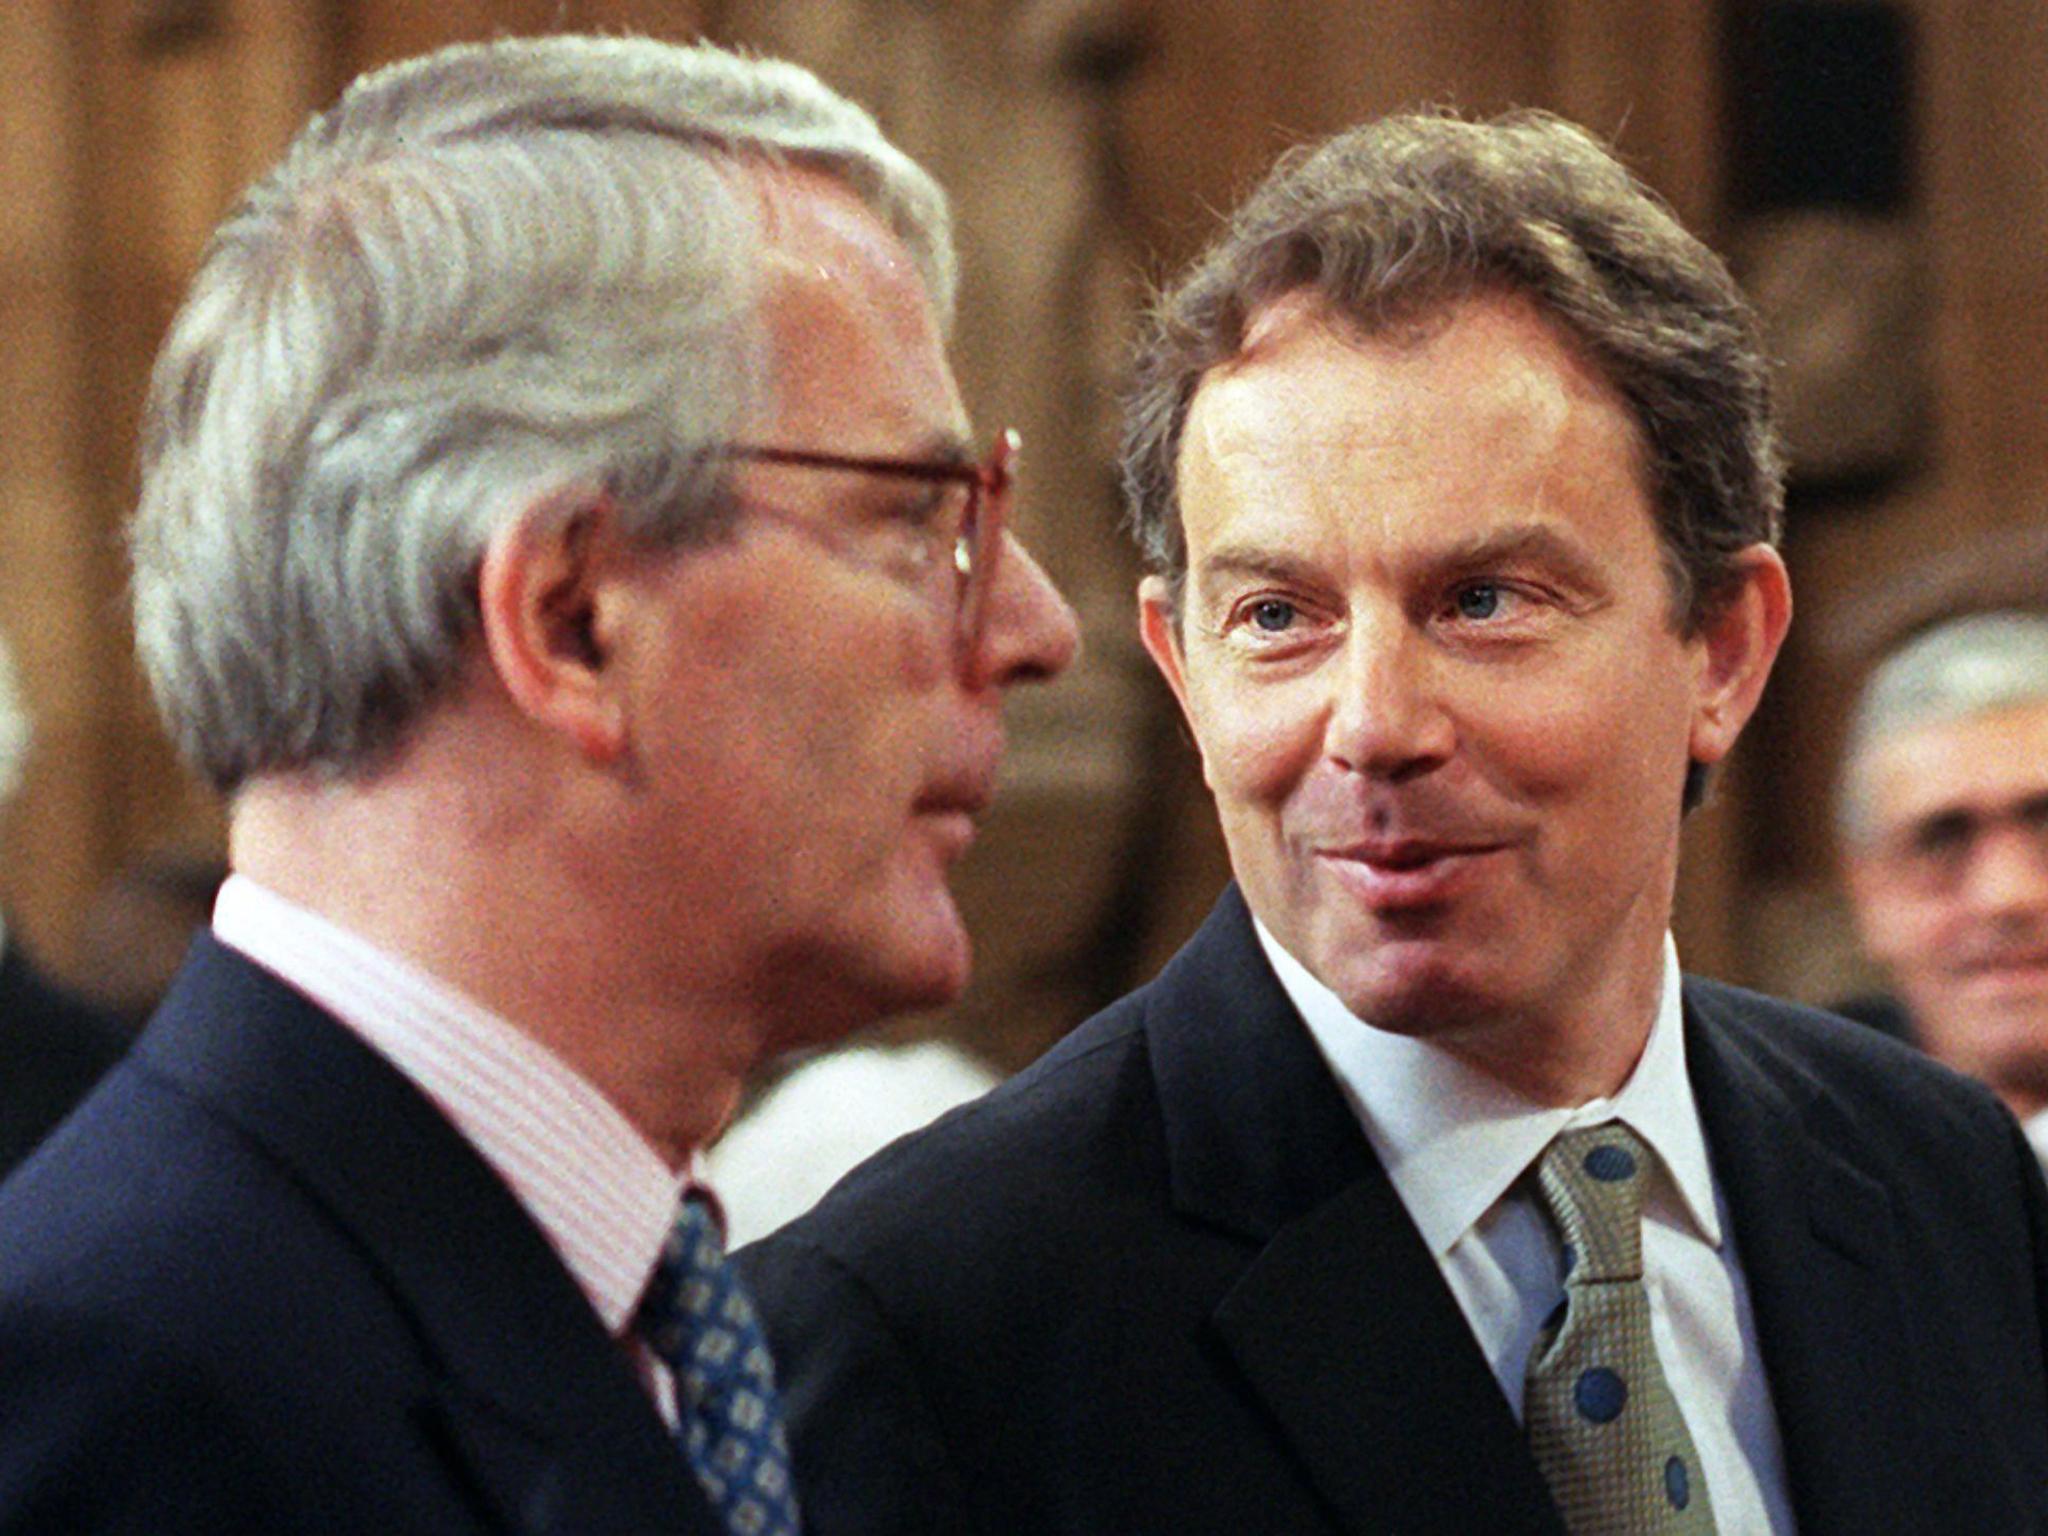 The former Prime Ministers in 1997